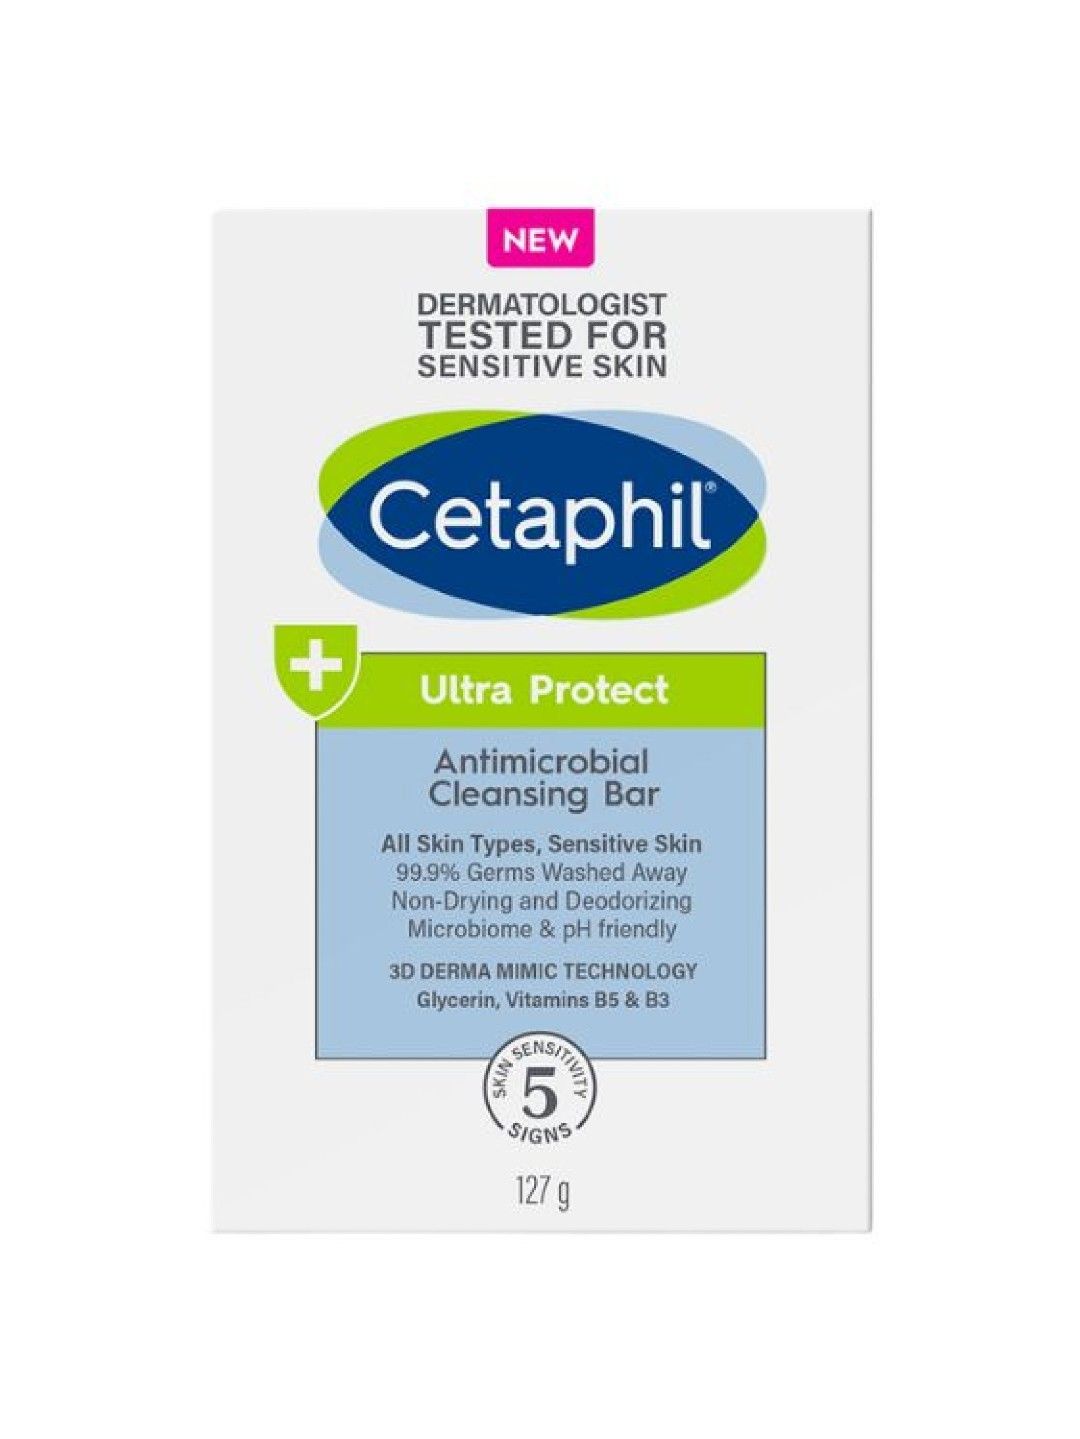 Cetaphil Ultra Protect Antimicrobial Bar (127g) [Expiry: Sep 2024]